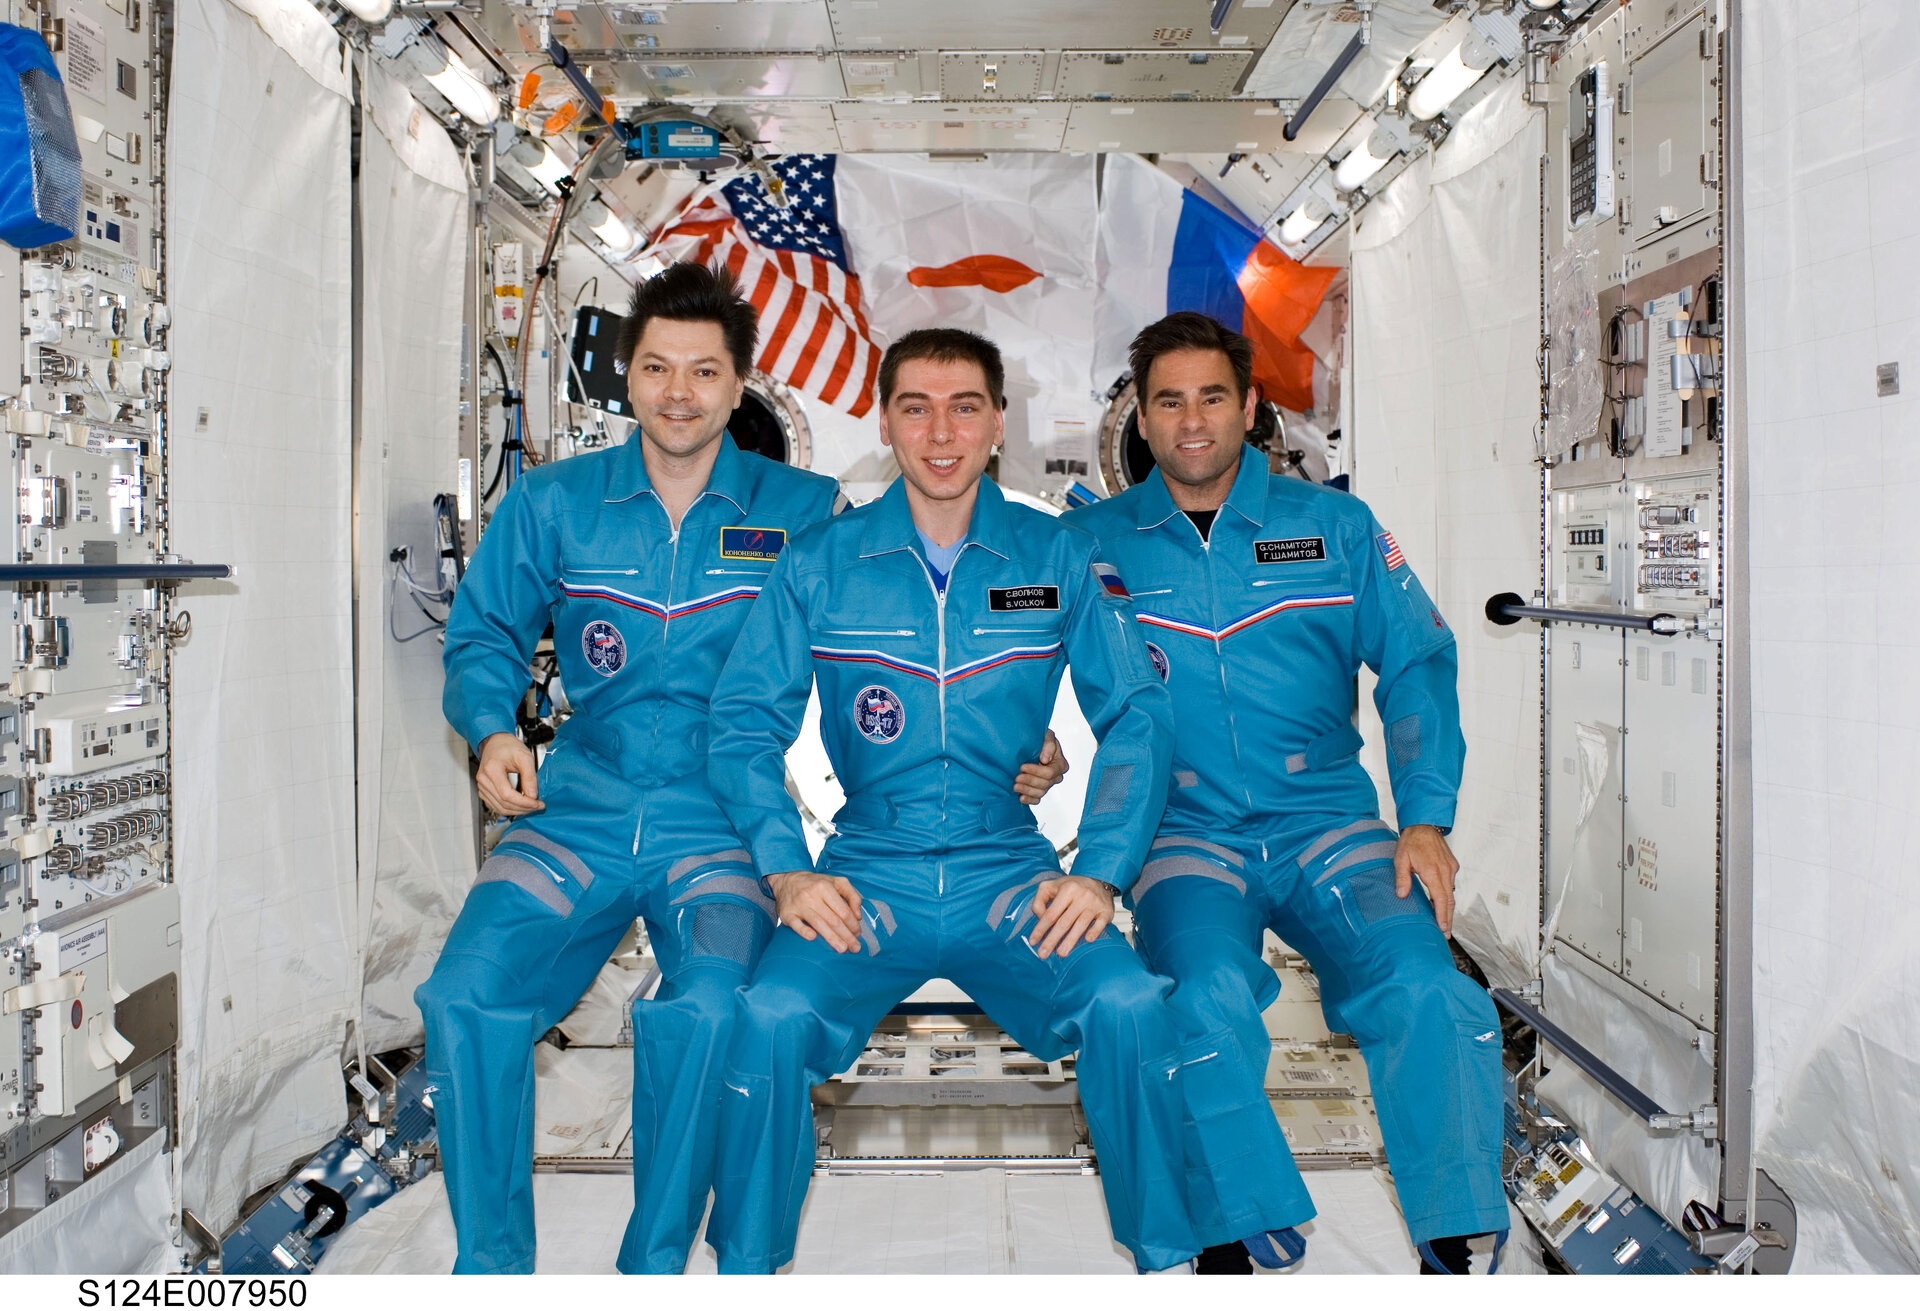 Expedition 17 ISS crew portrait inside Kibo Japanese Pressurized Module